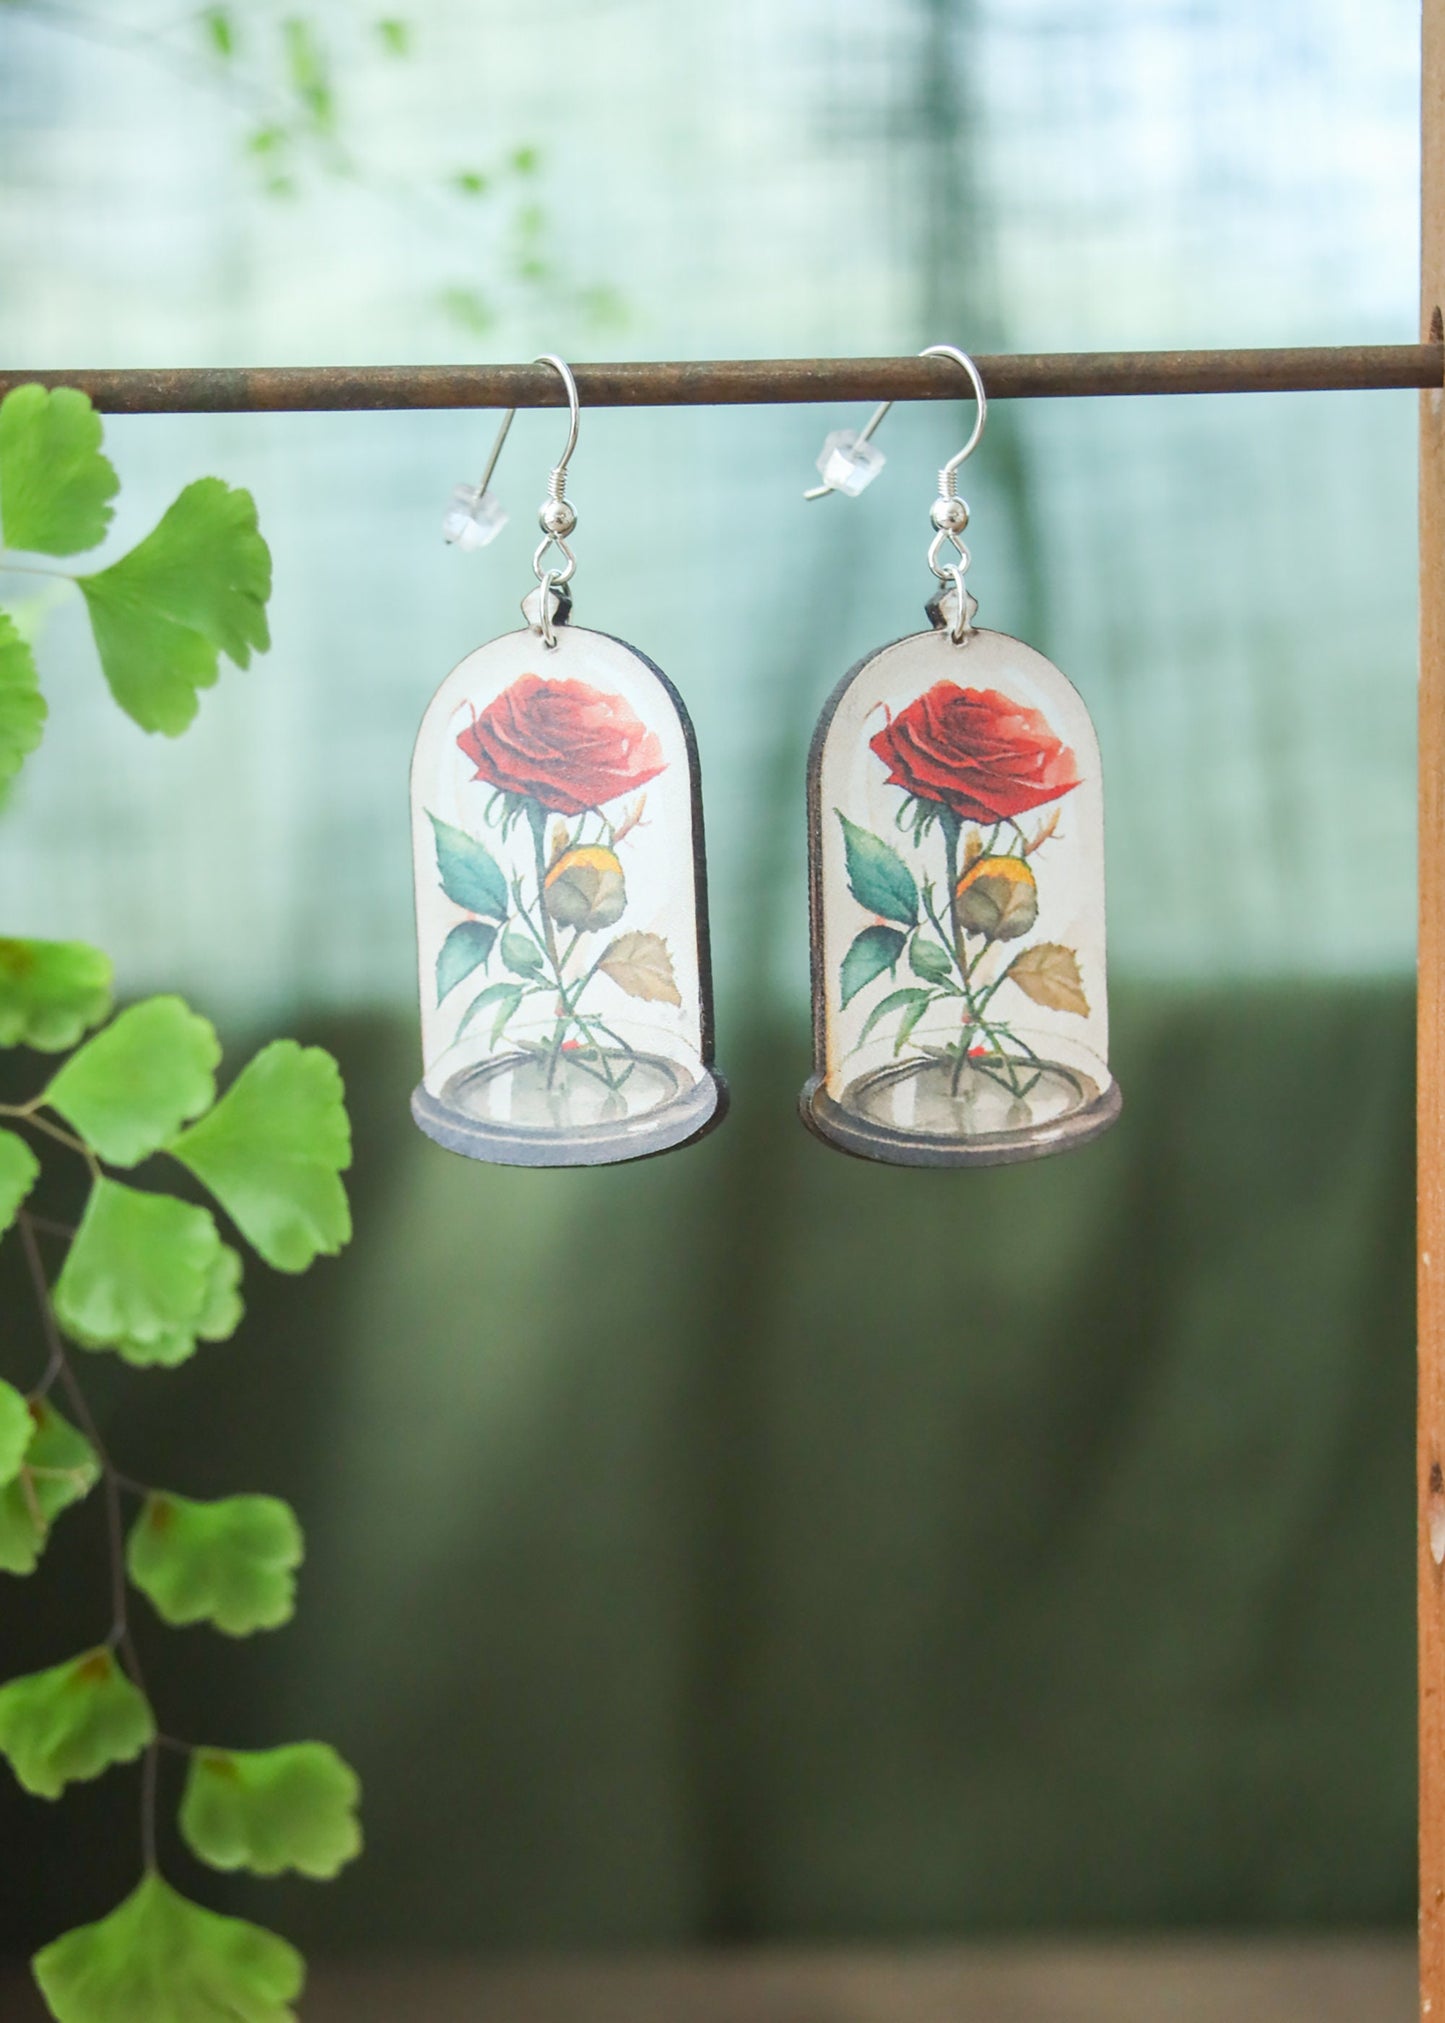 Glass Rose Earrings | Fairytale Story Book Fantasy Jewelry | Whimsical Fantasy Floral Jar Dangles | Laser Cut Wood Boho Fairycore Charms